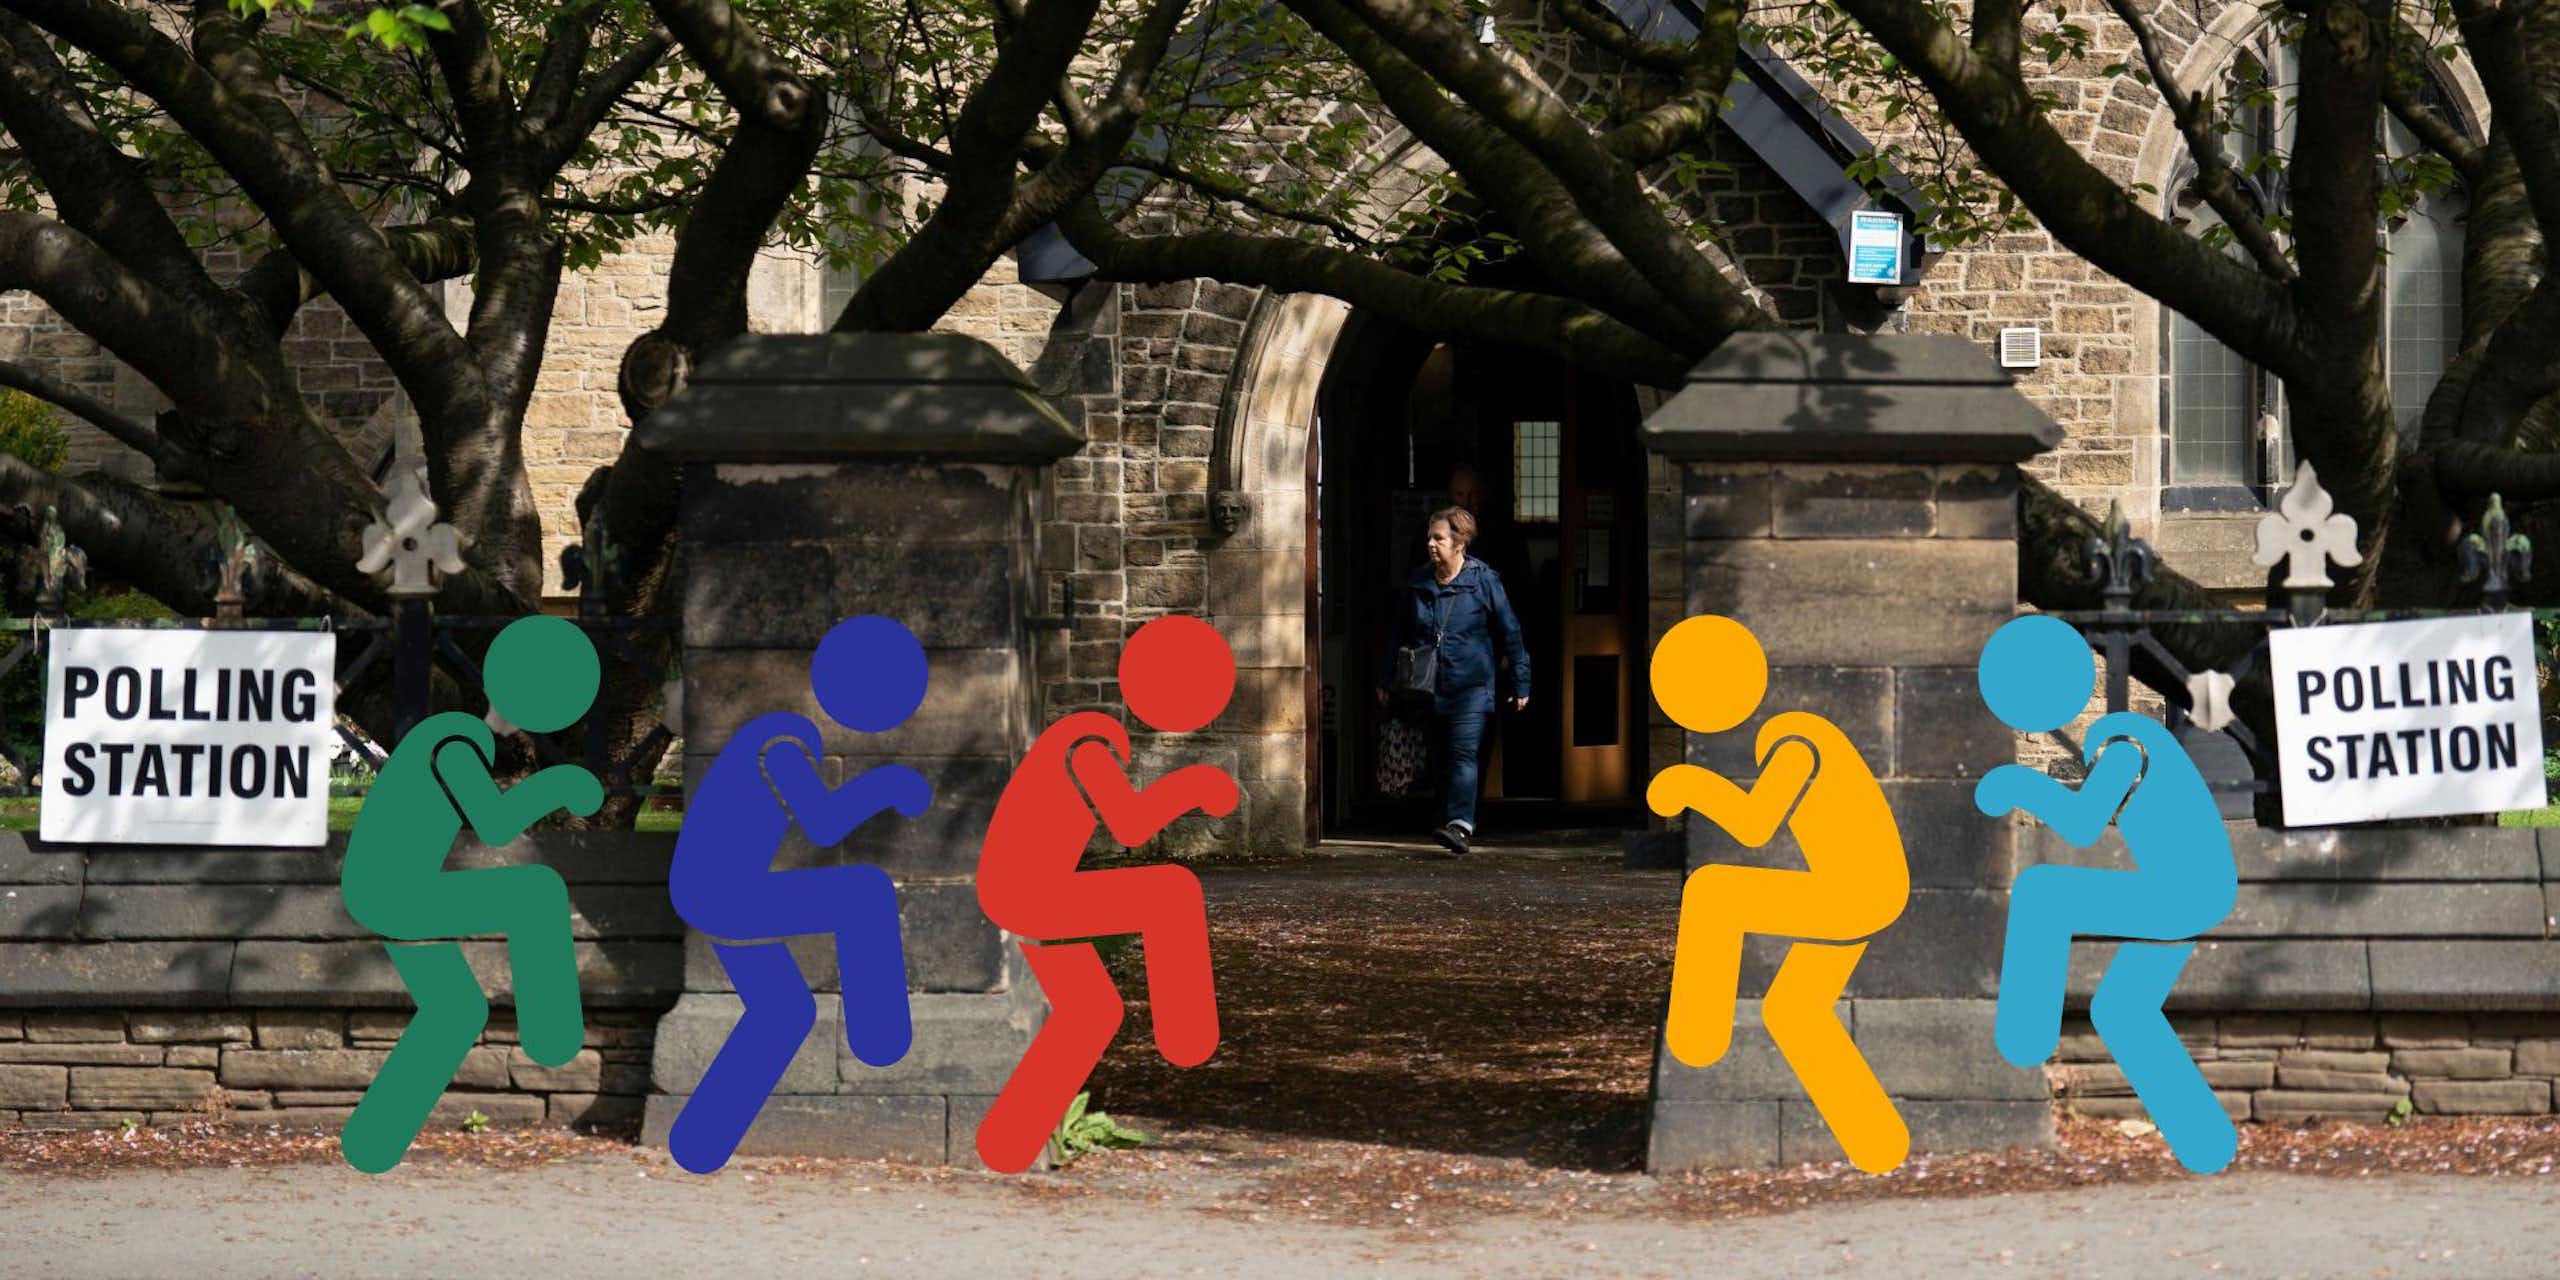 Five figures in the colours of green, dark blue, red, orange, and light blue, sneak into a polling station.